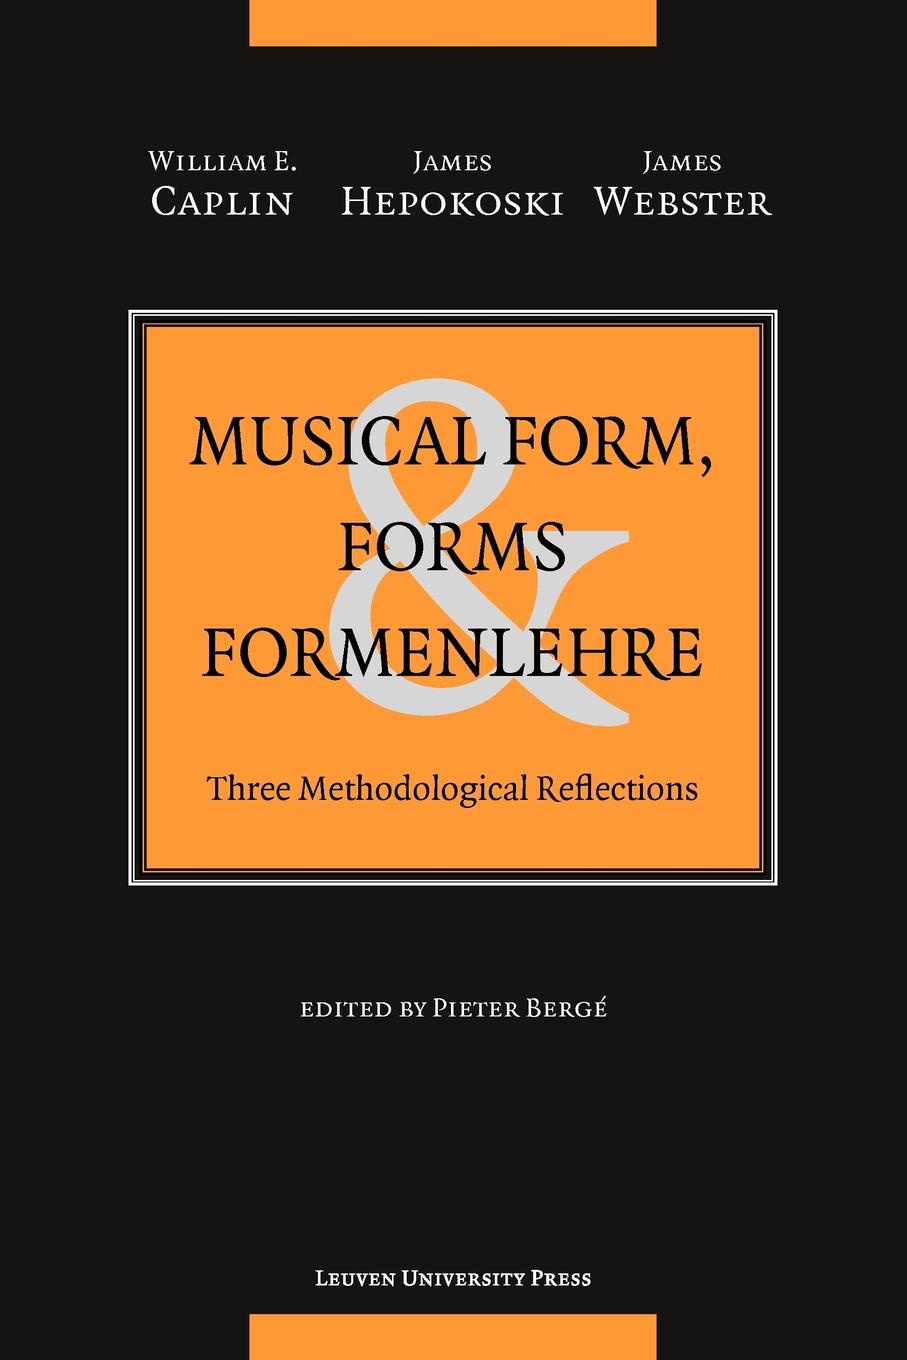 Musical Form, Forms . Formenlehre